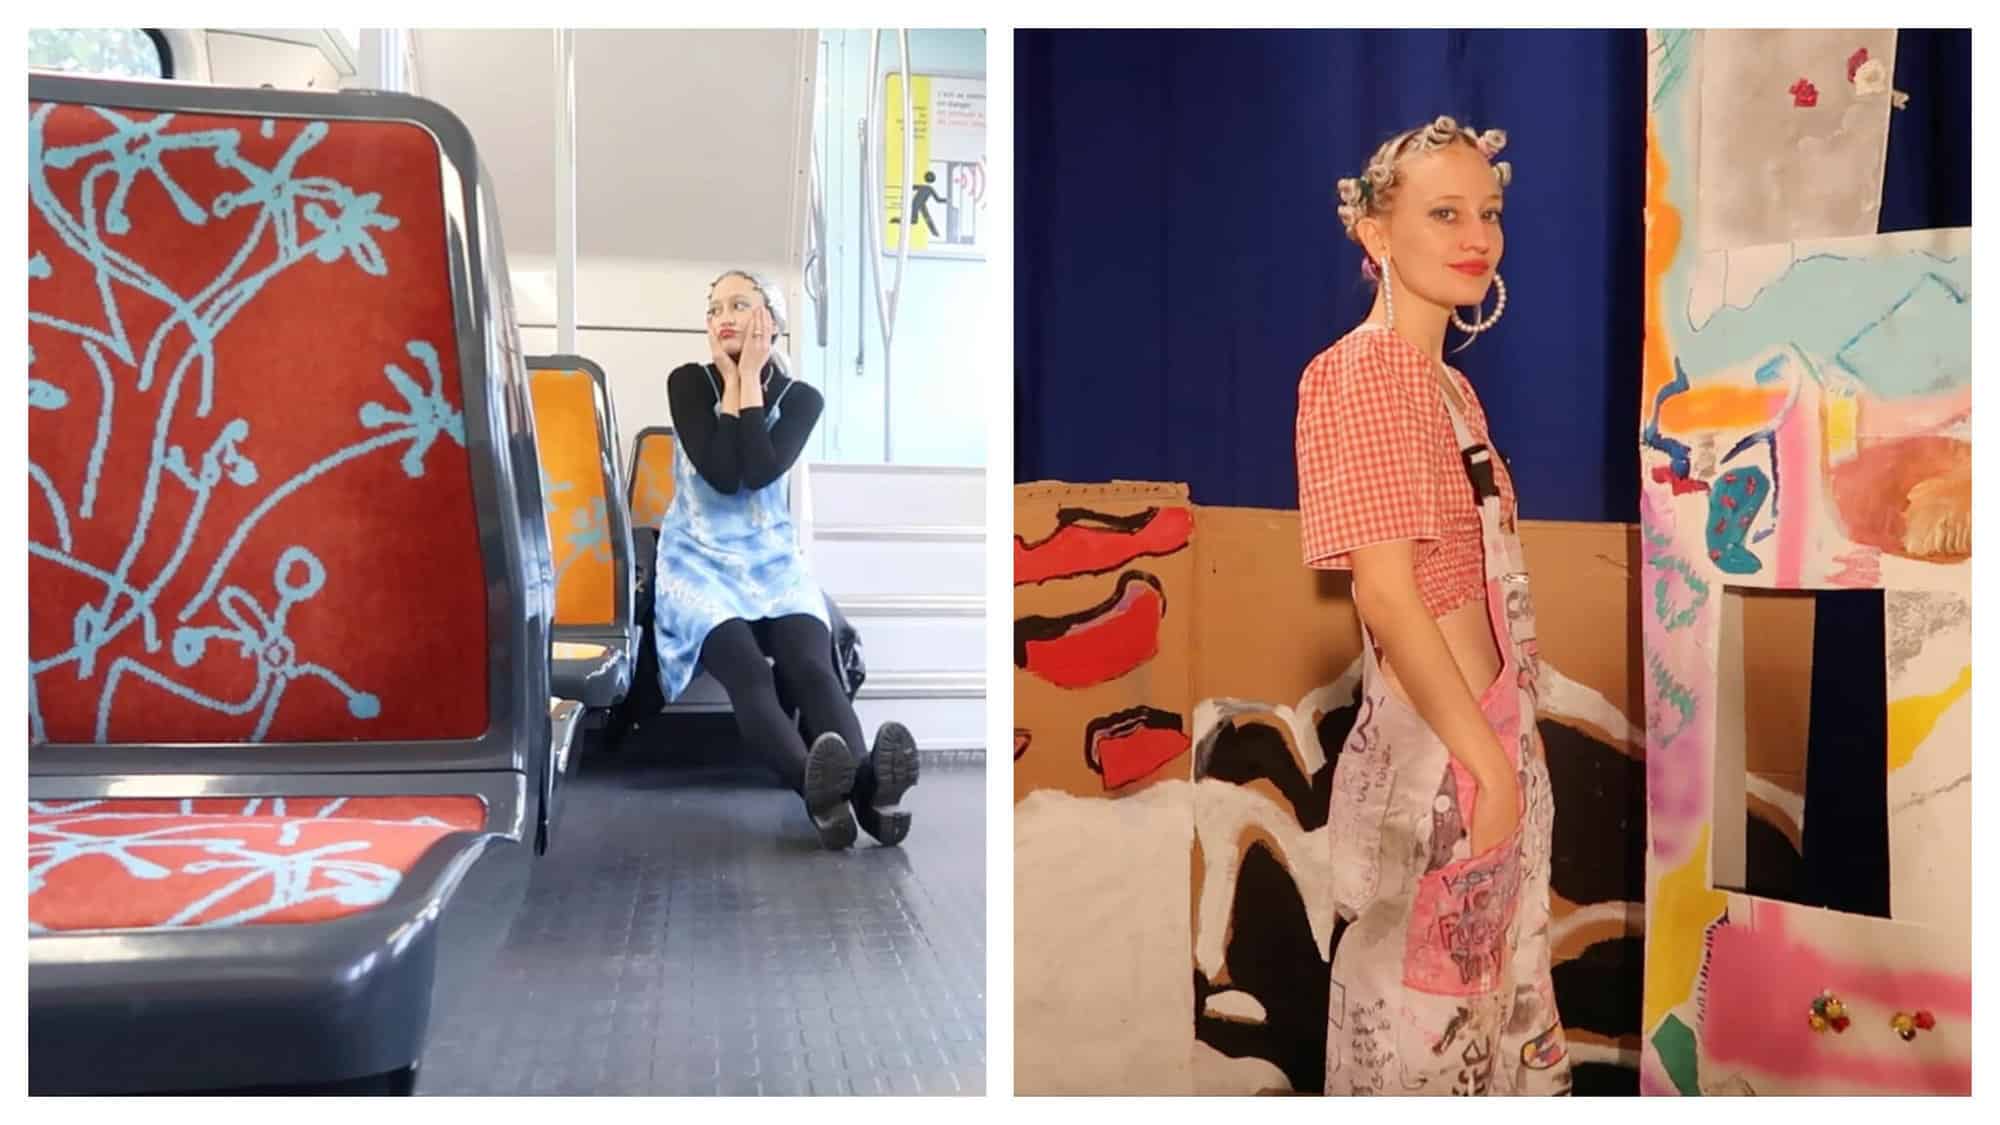 Left: A woman is sitting on the métro train in Paris. She is seated a few seats back compared to where the photo is taken from. Right: The same woman stands next to various art installations. 